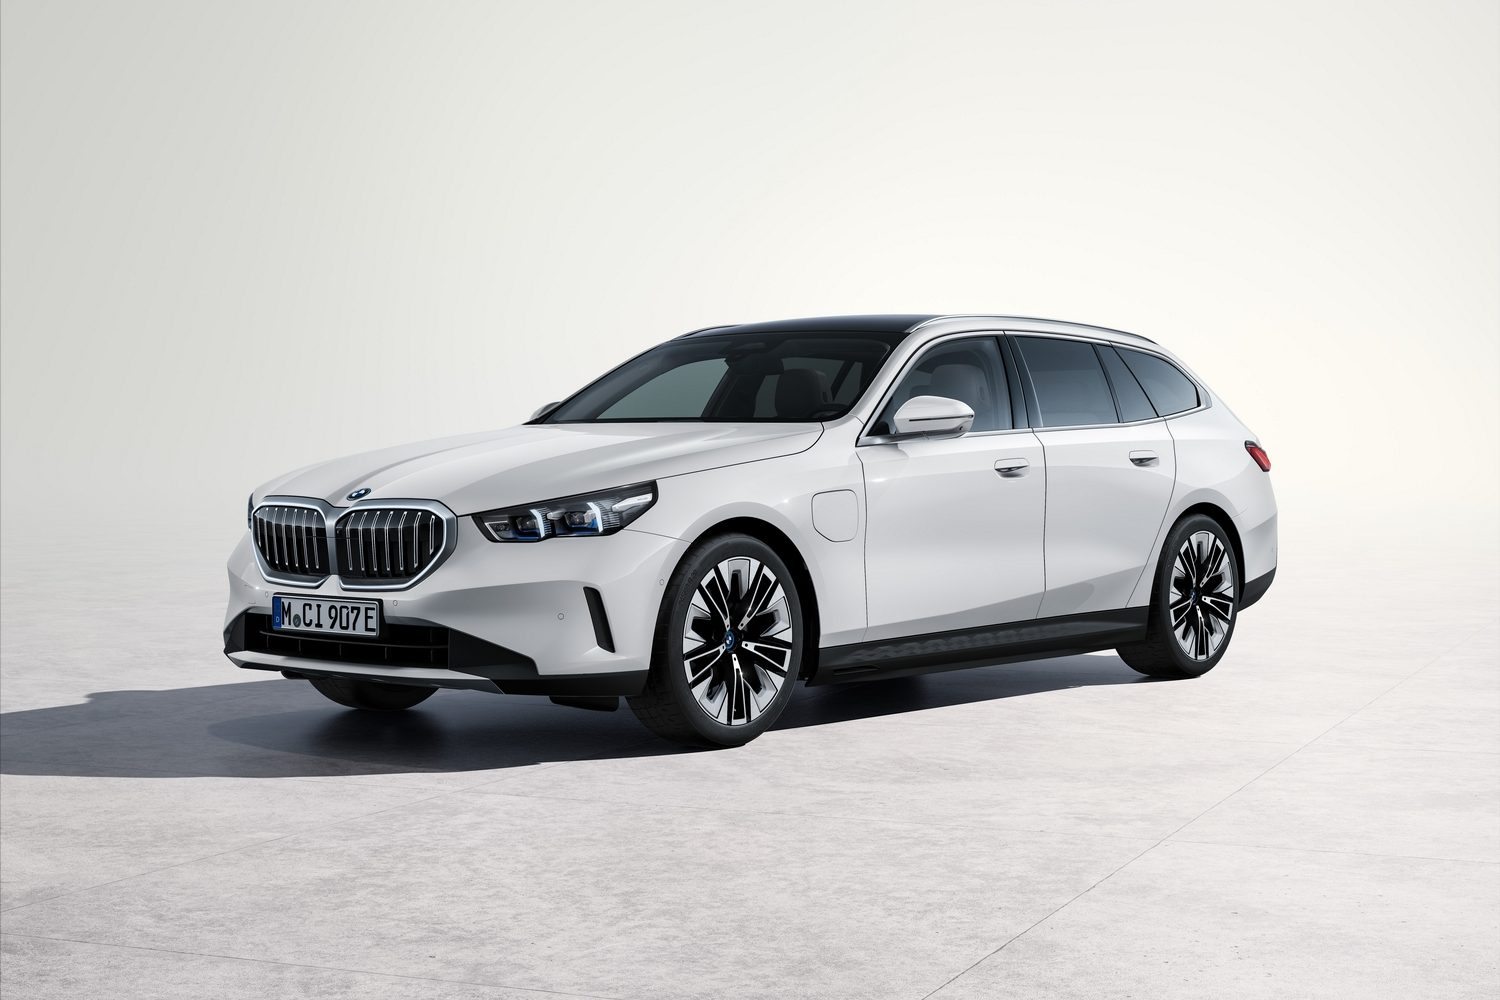 BMW shows off new 5 Series Touring